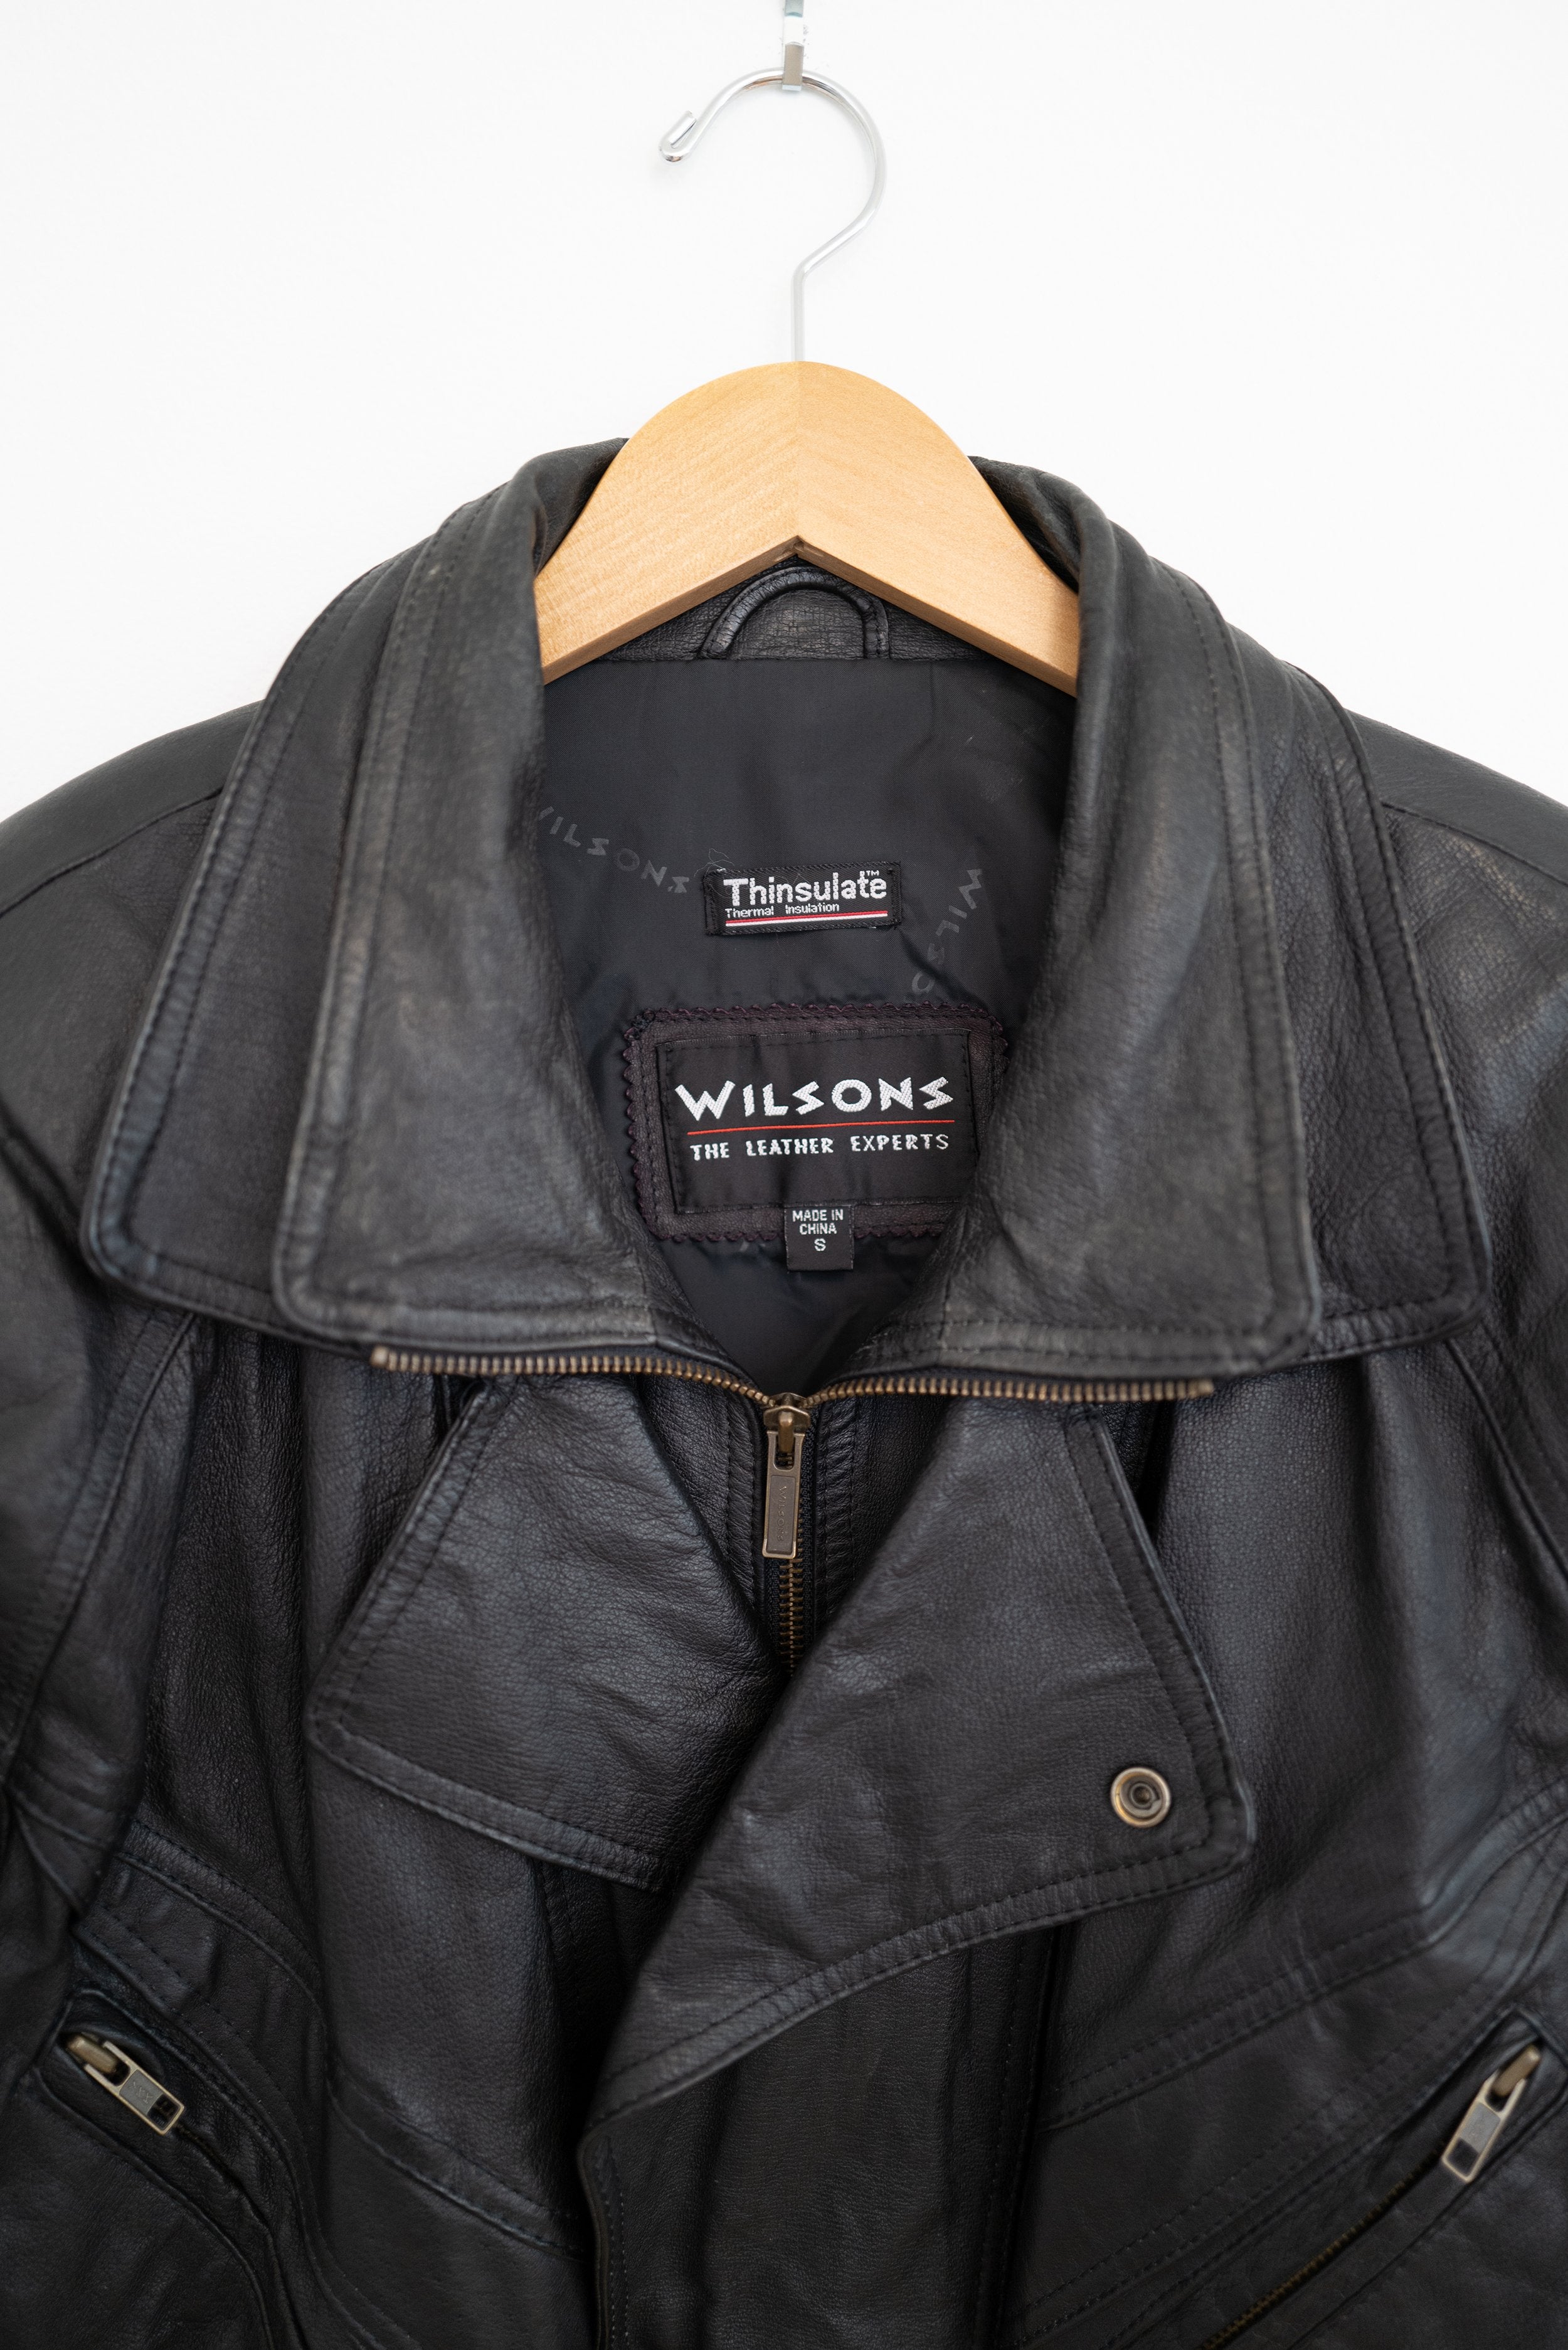 Vintage Wilsons Leather Jacket - Size Small